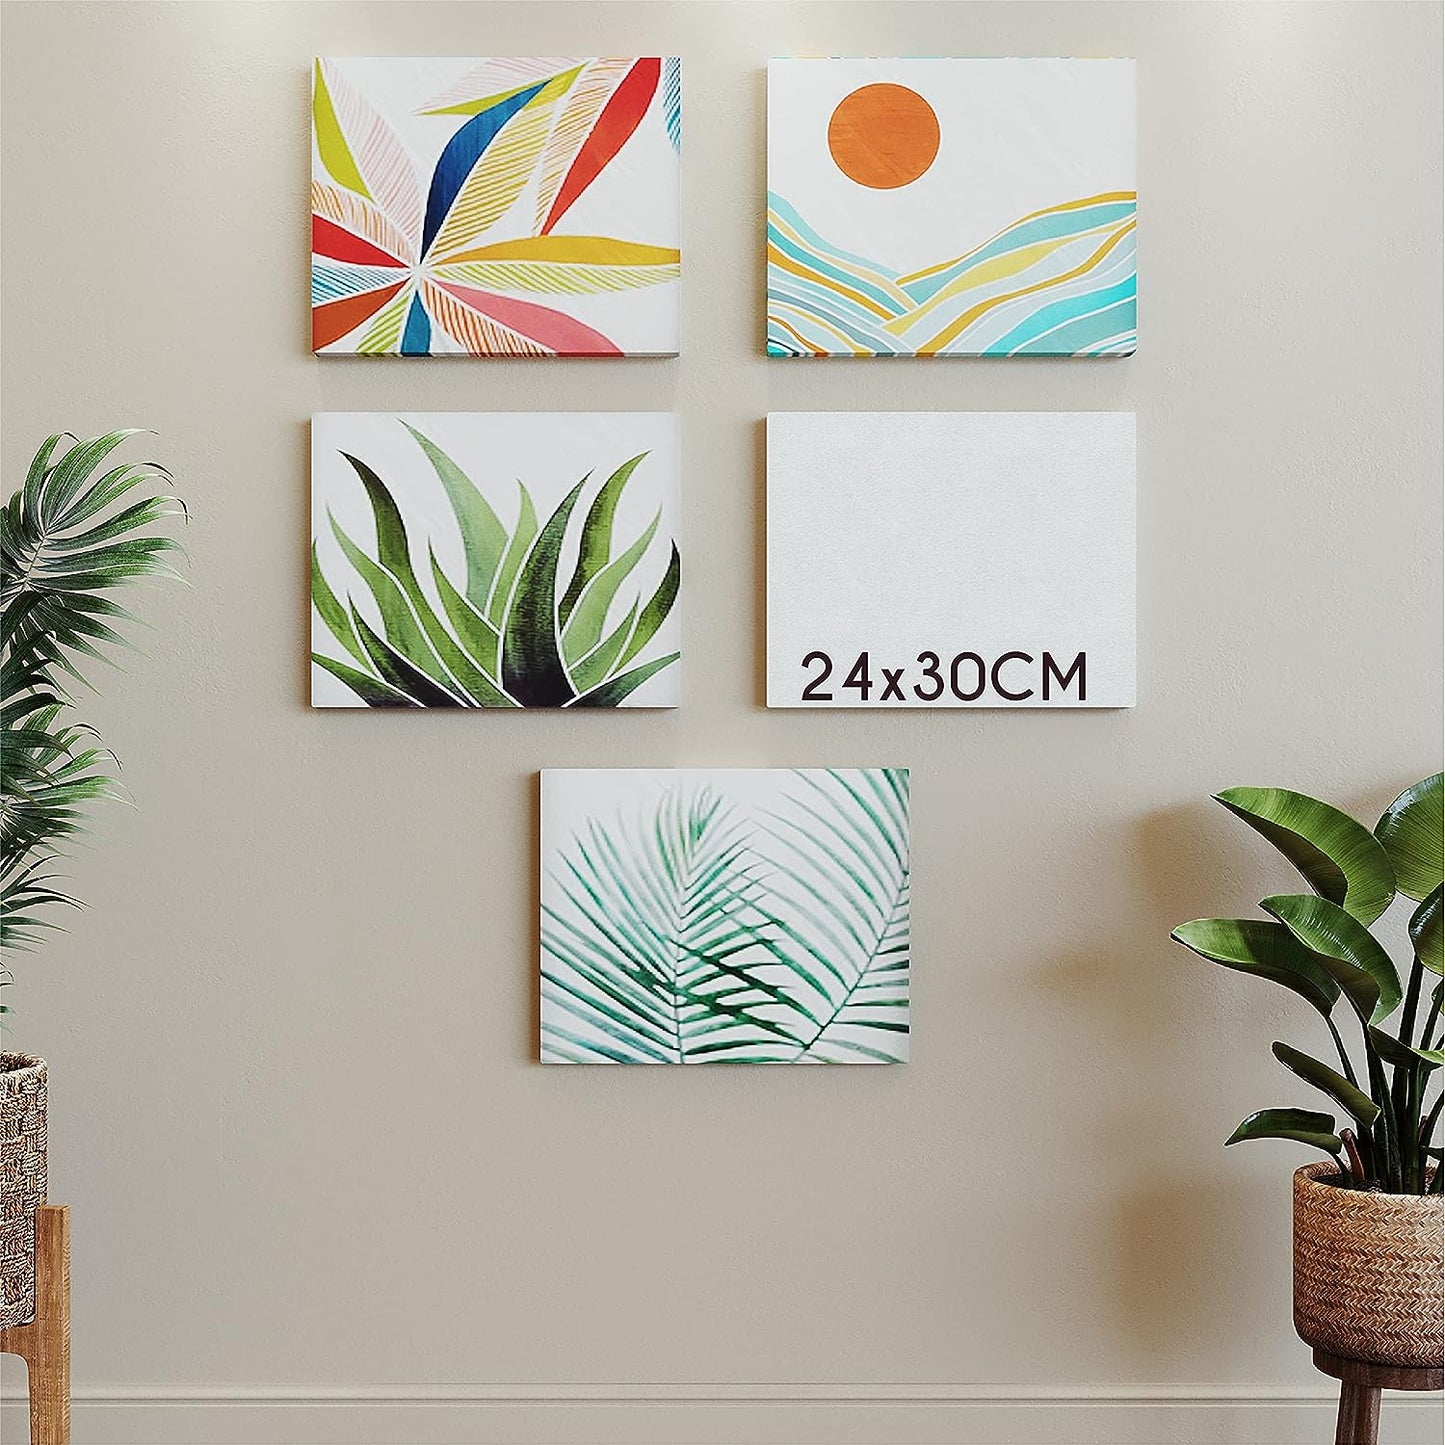 5 Canvases to Paint with frame 24 x 30 cm